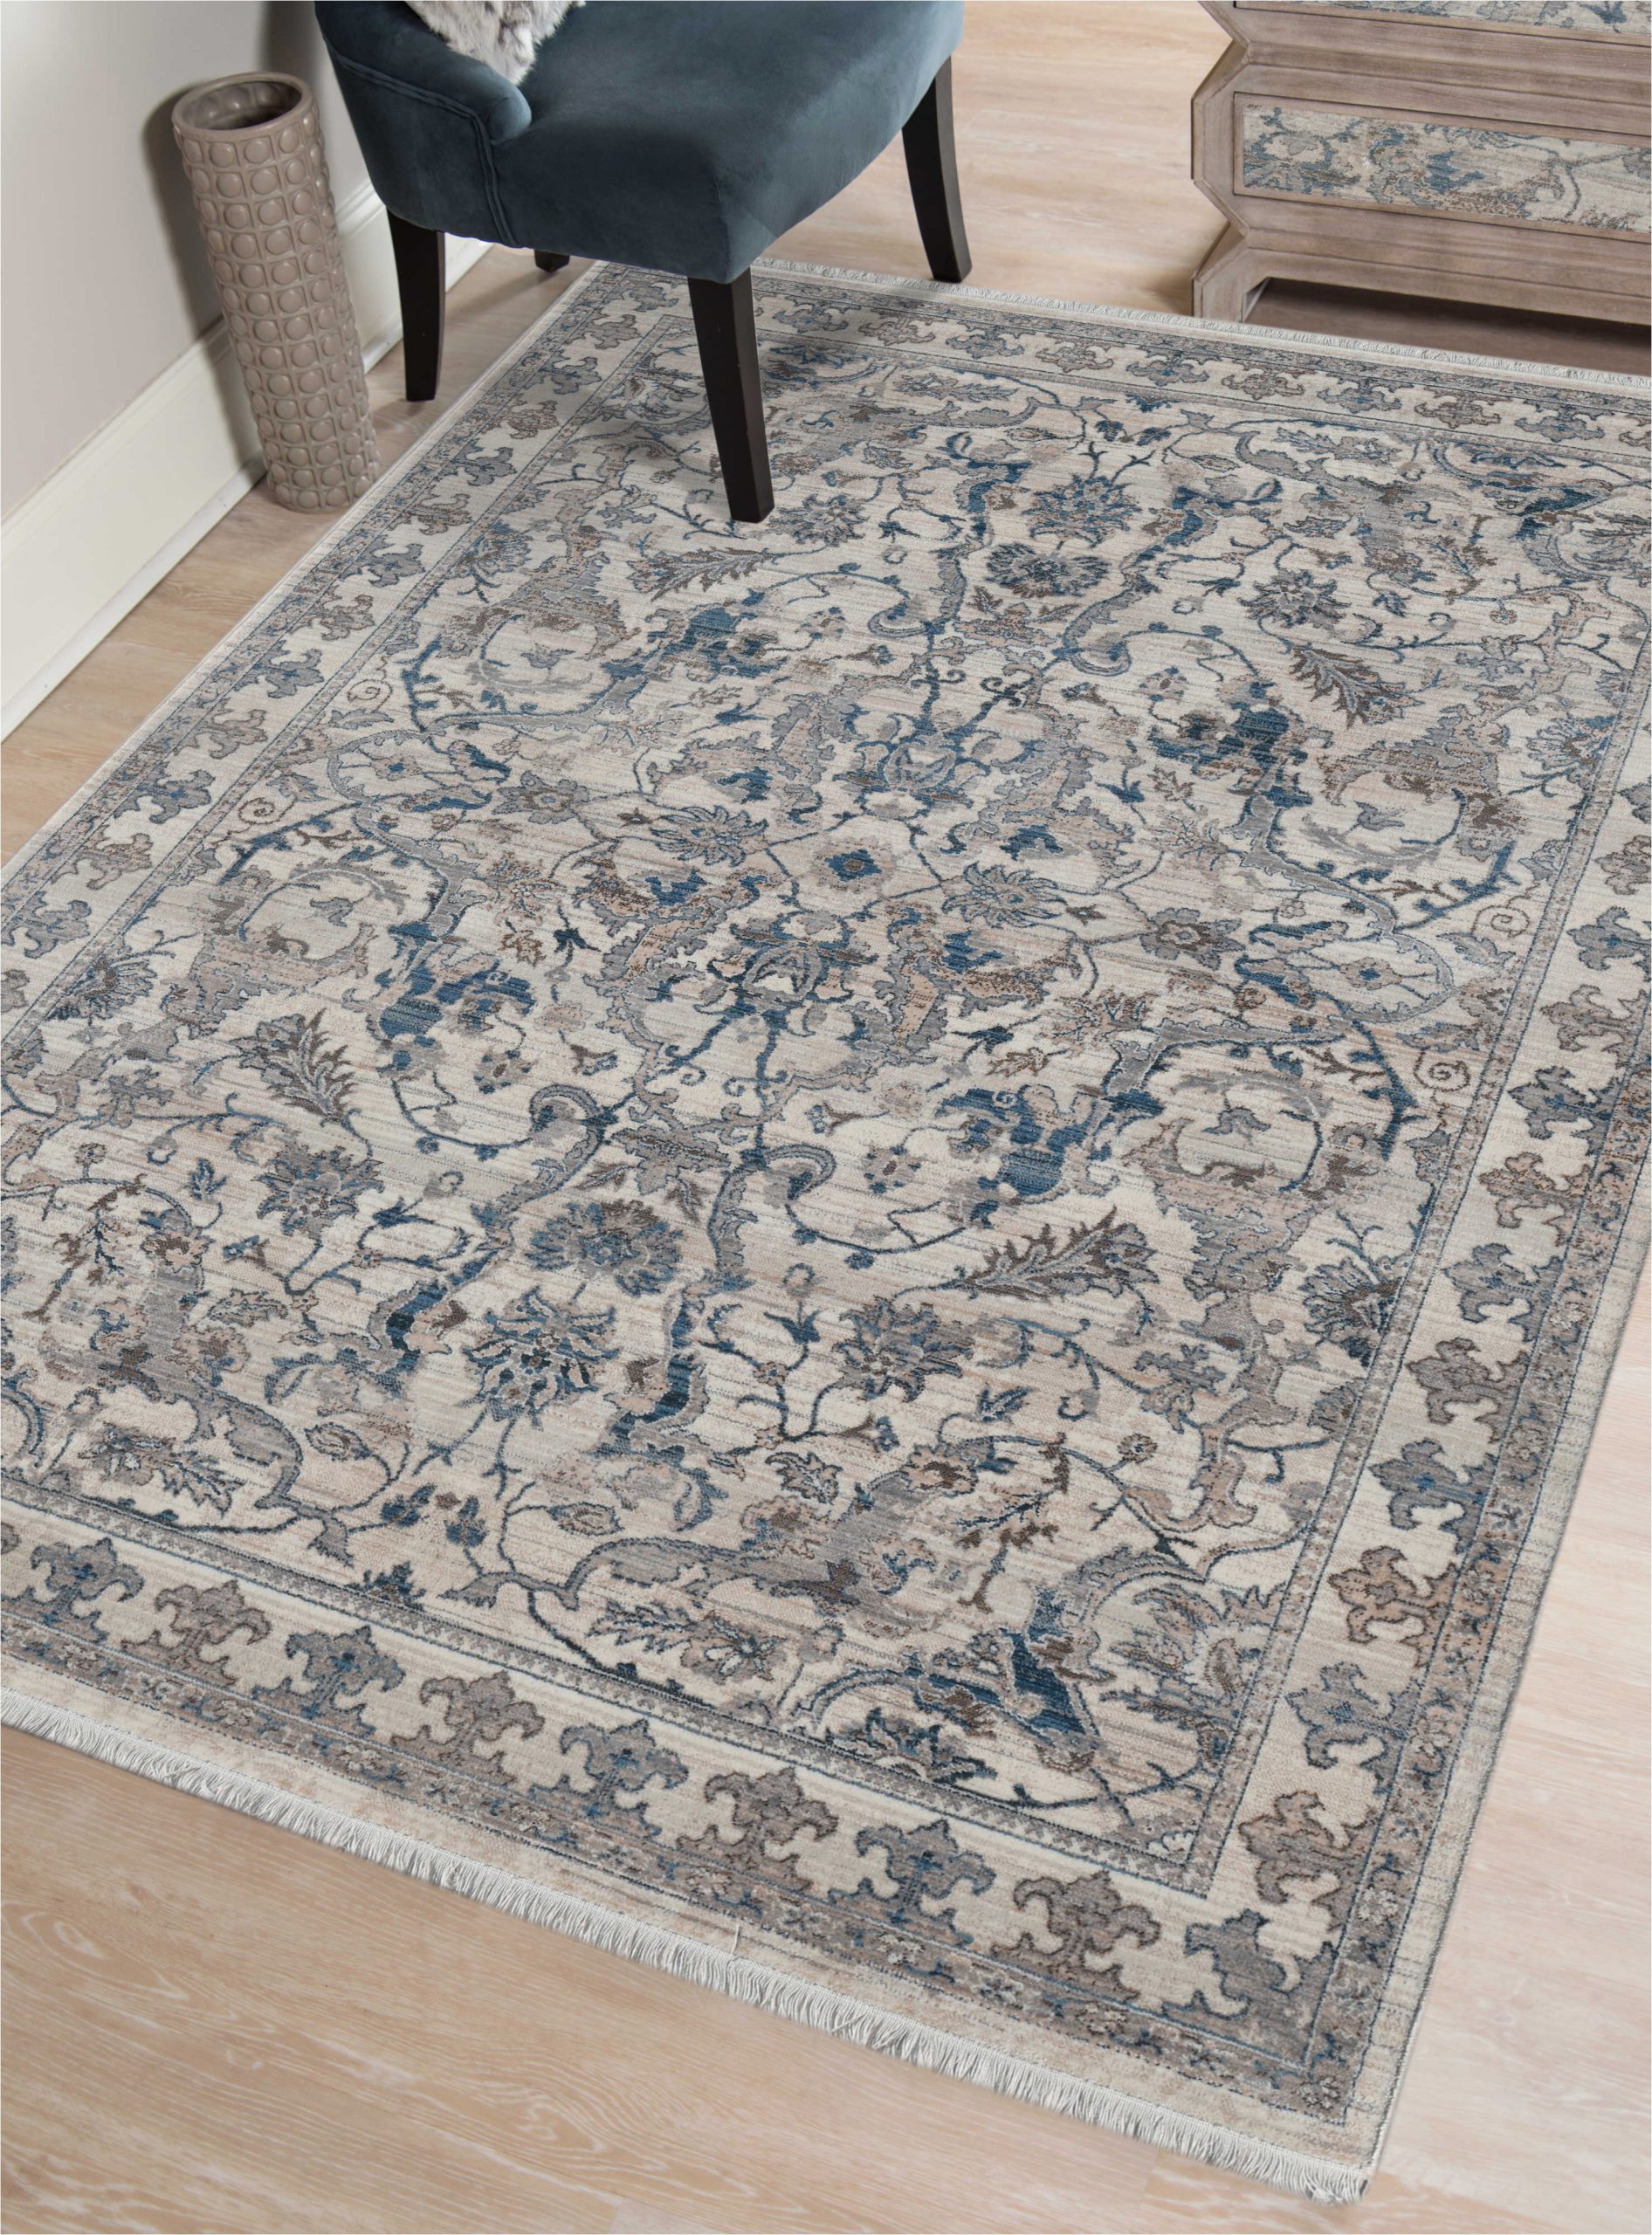 Area Rugs with Blue and Browns Amer Rugs Arcadia Cream Blue Brown Rectangular area Rug